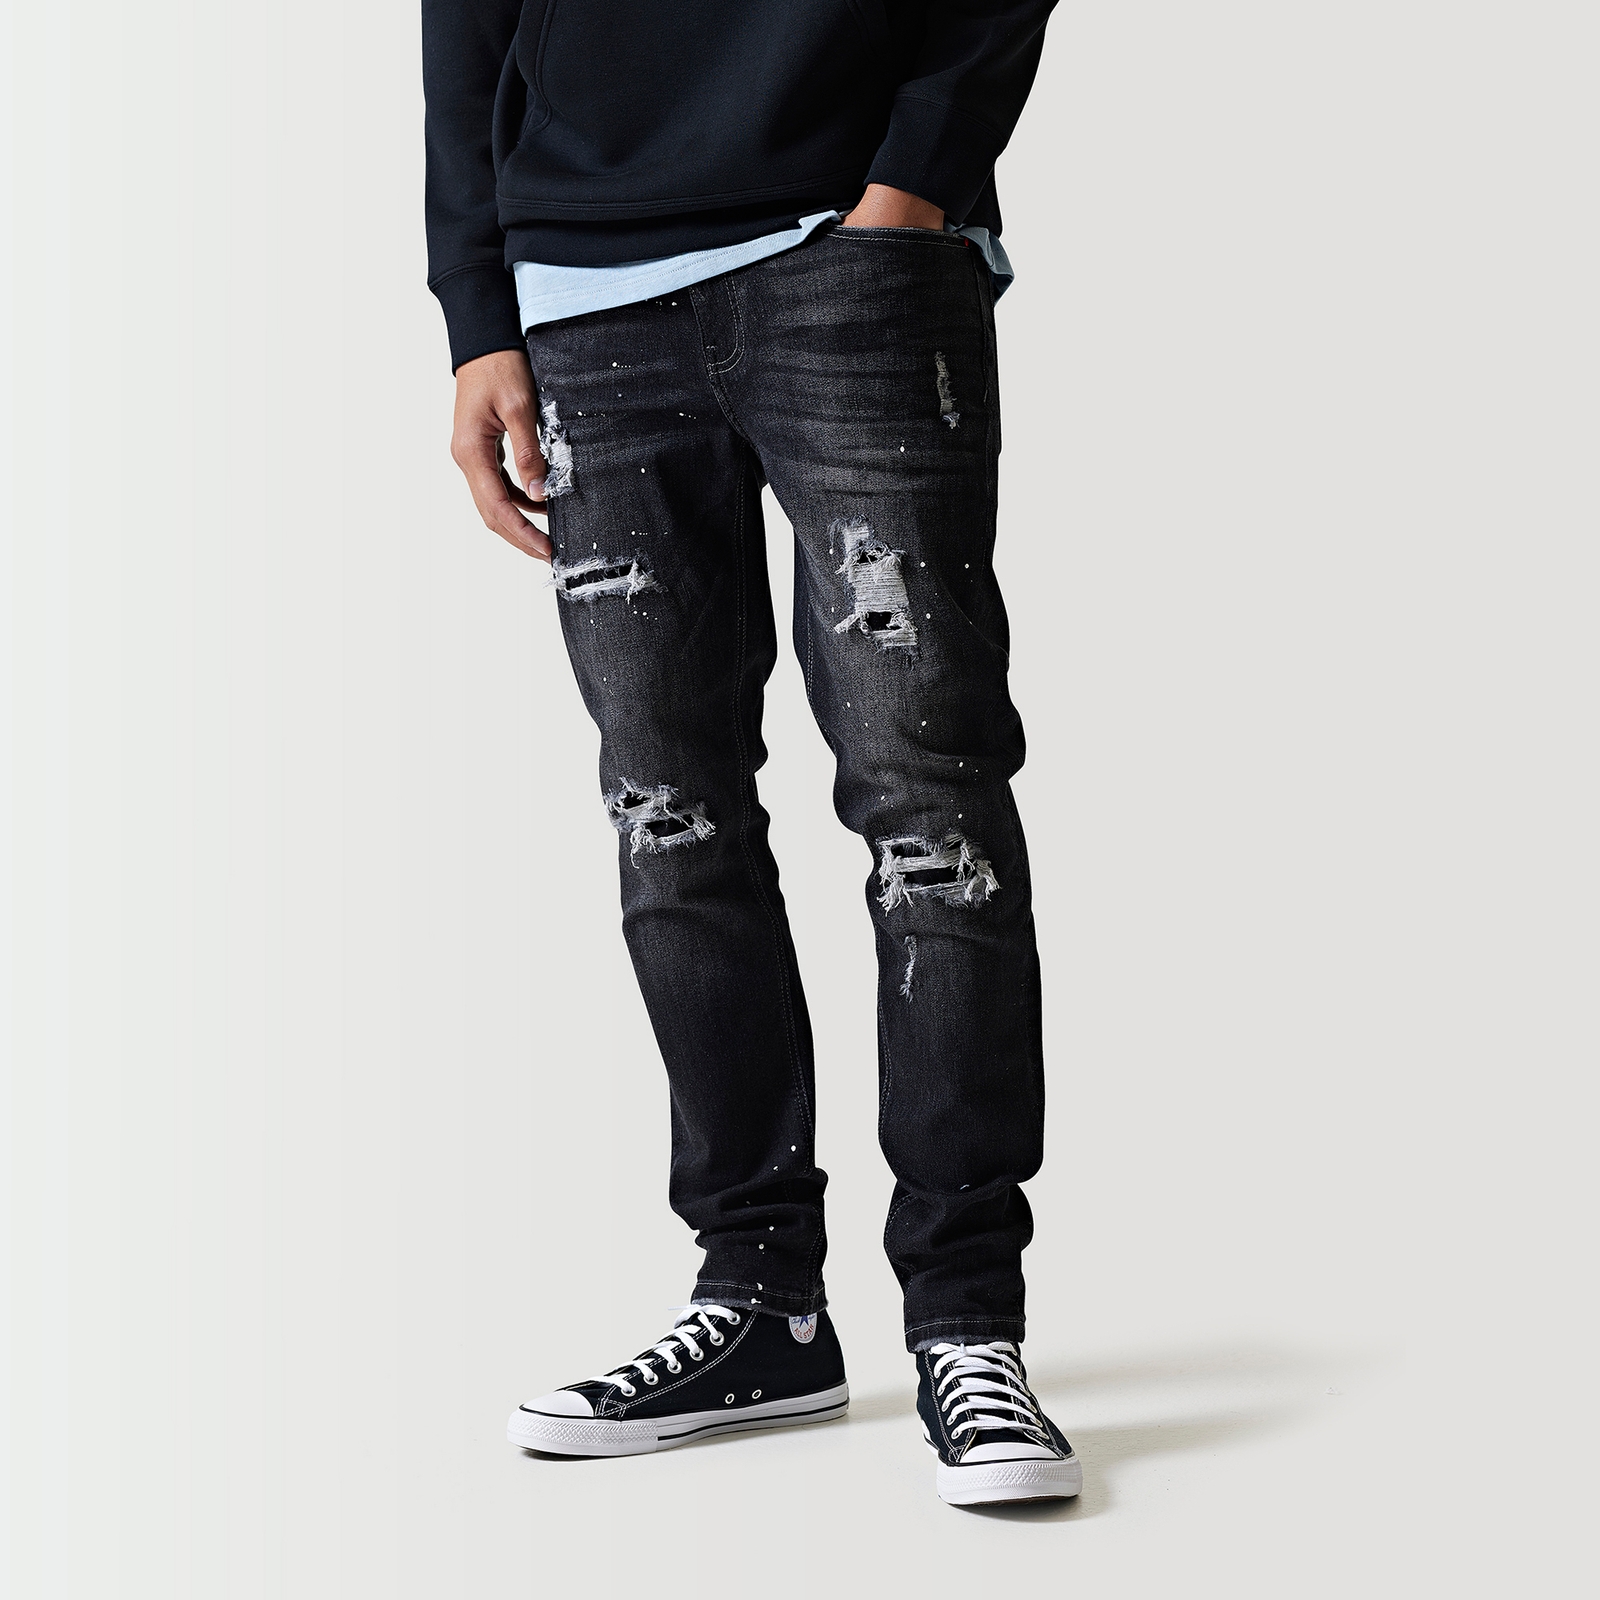 11 Degrees Sustainable Distressed Slim Tapered Jeans - Charcoal - W30 L32 from 11 Degrees